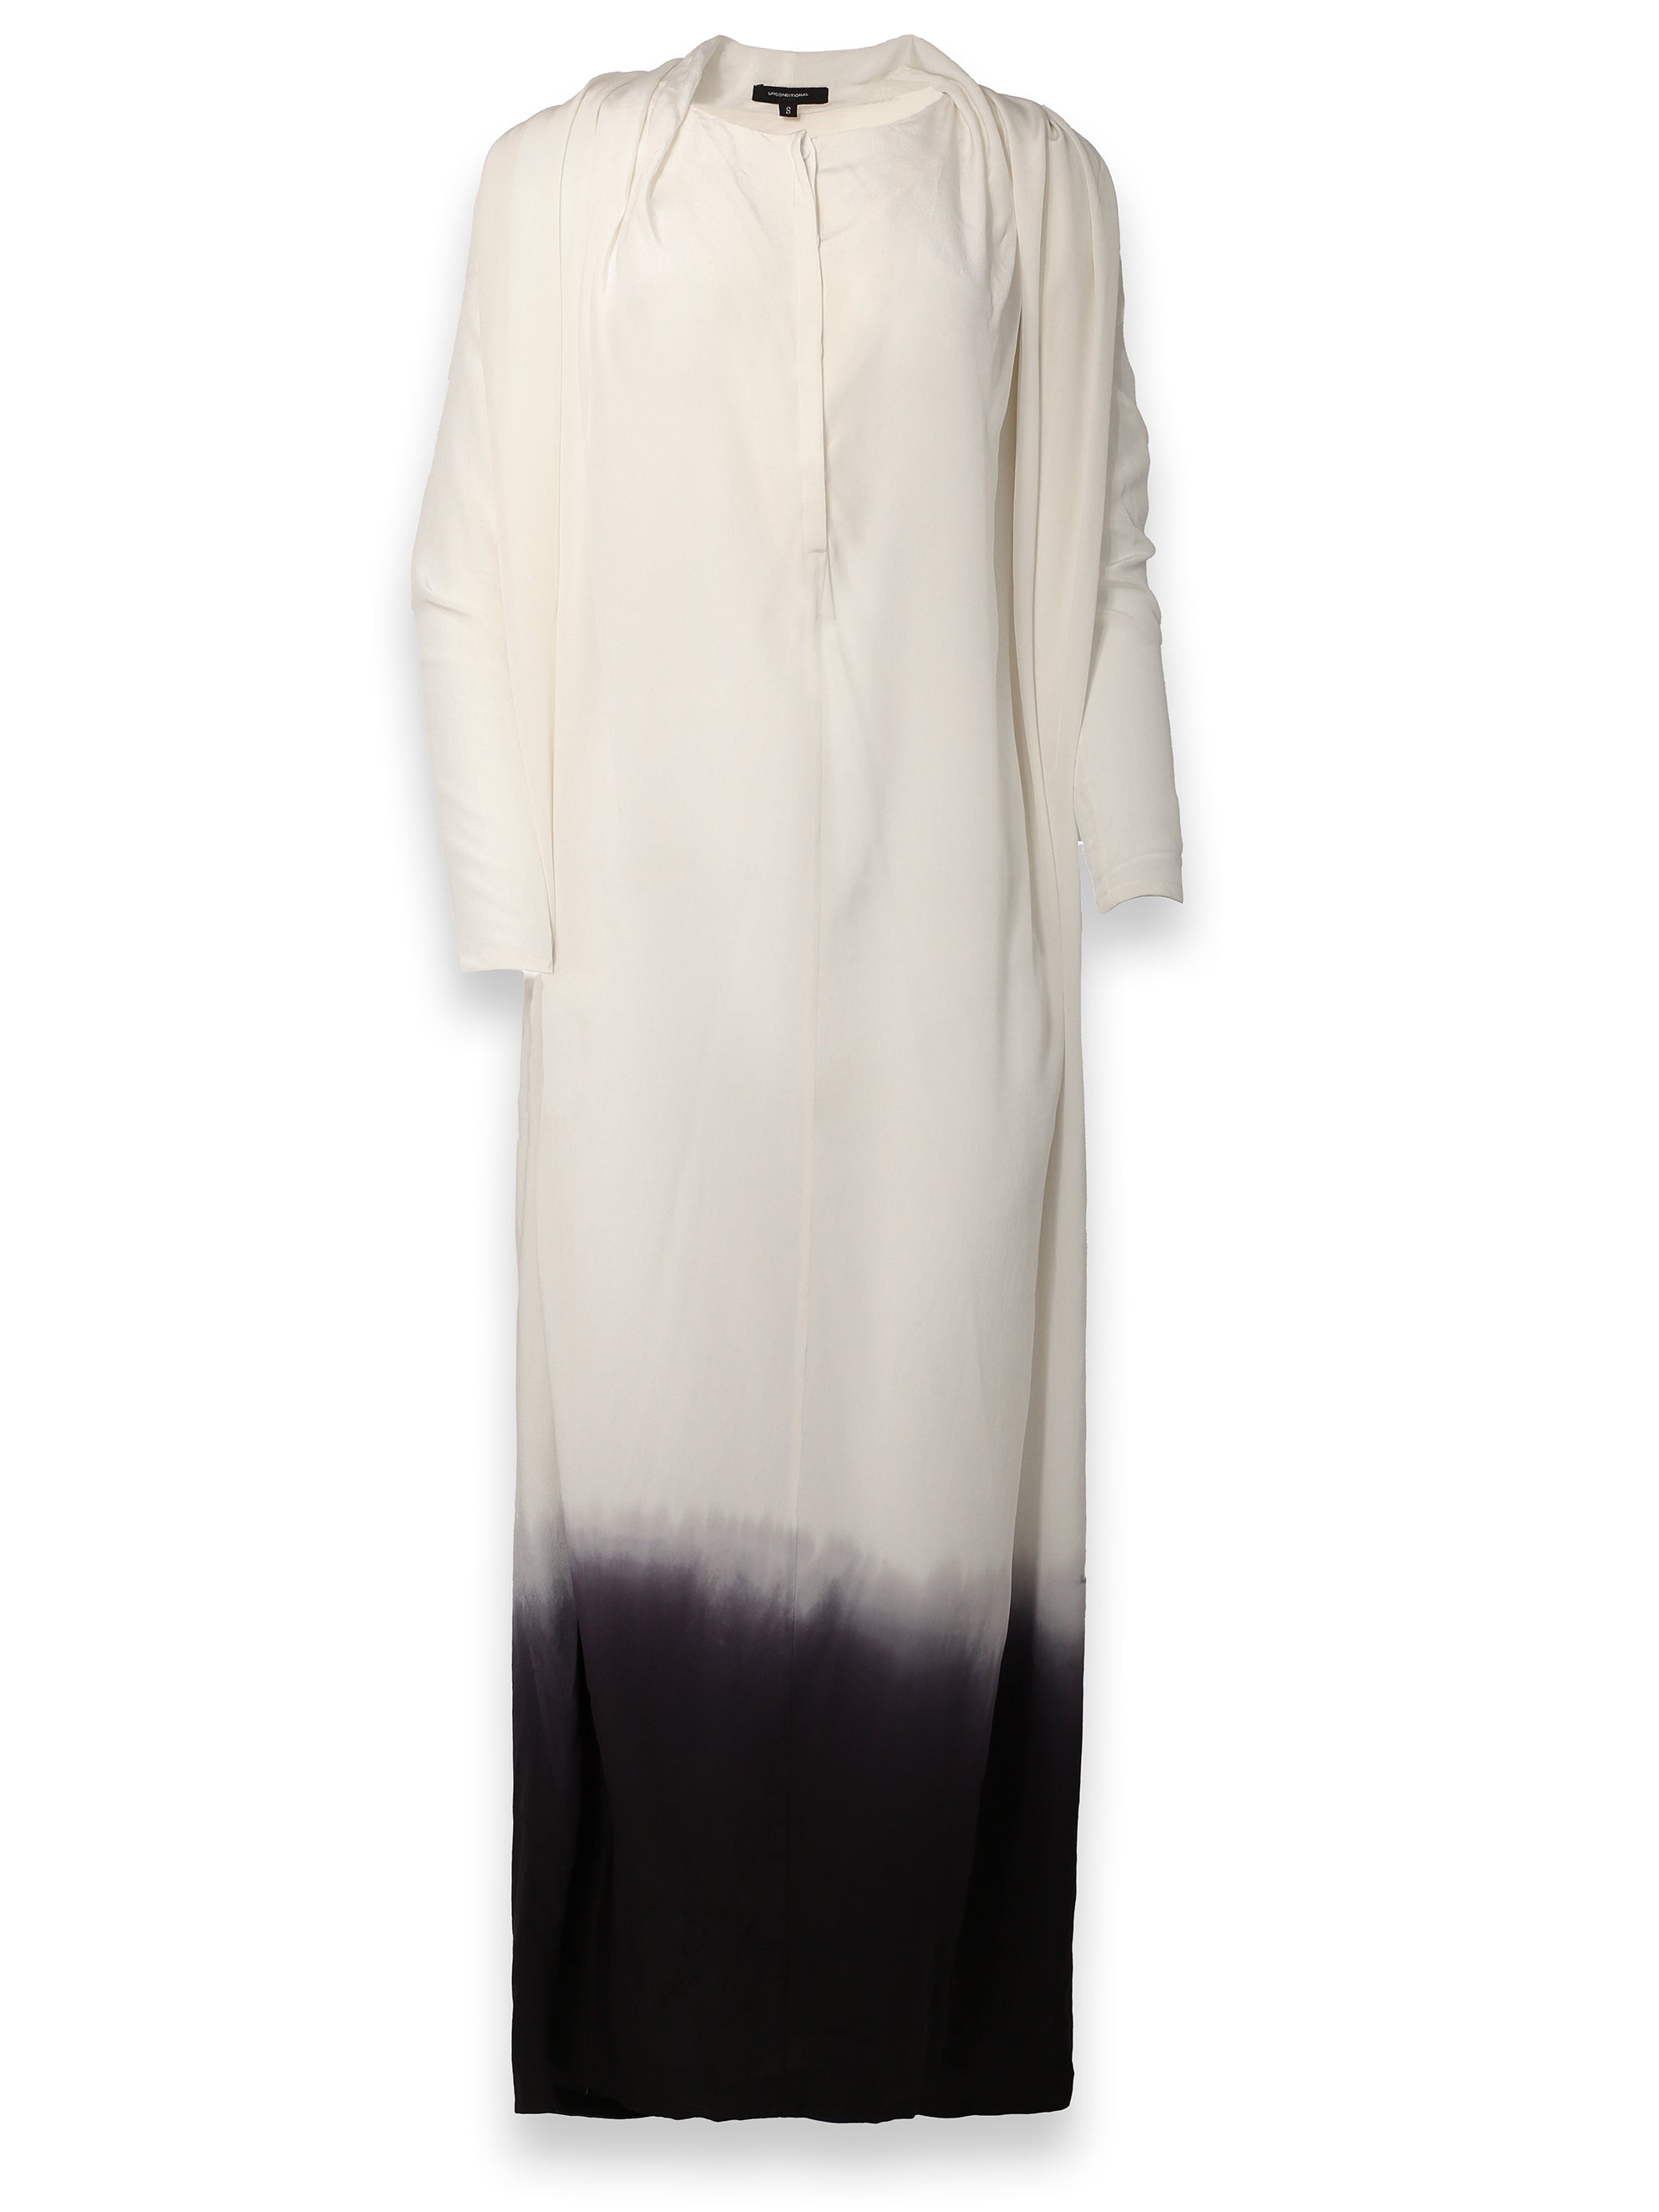 Long Sleeve White Dress with Purple Ombre Detail and Hood